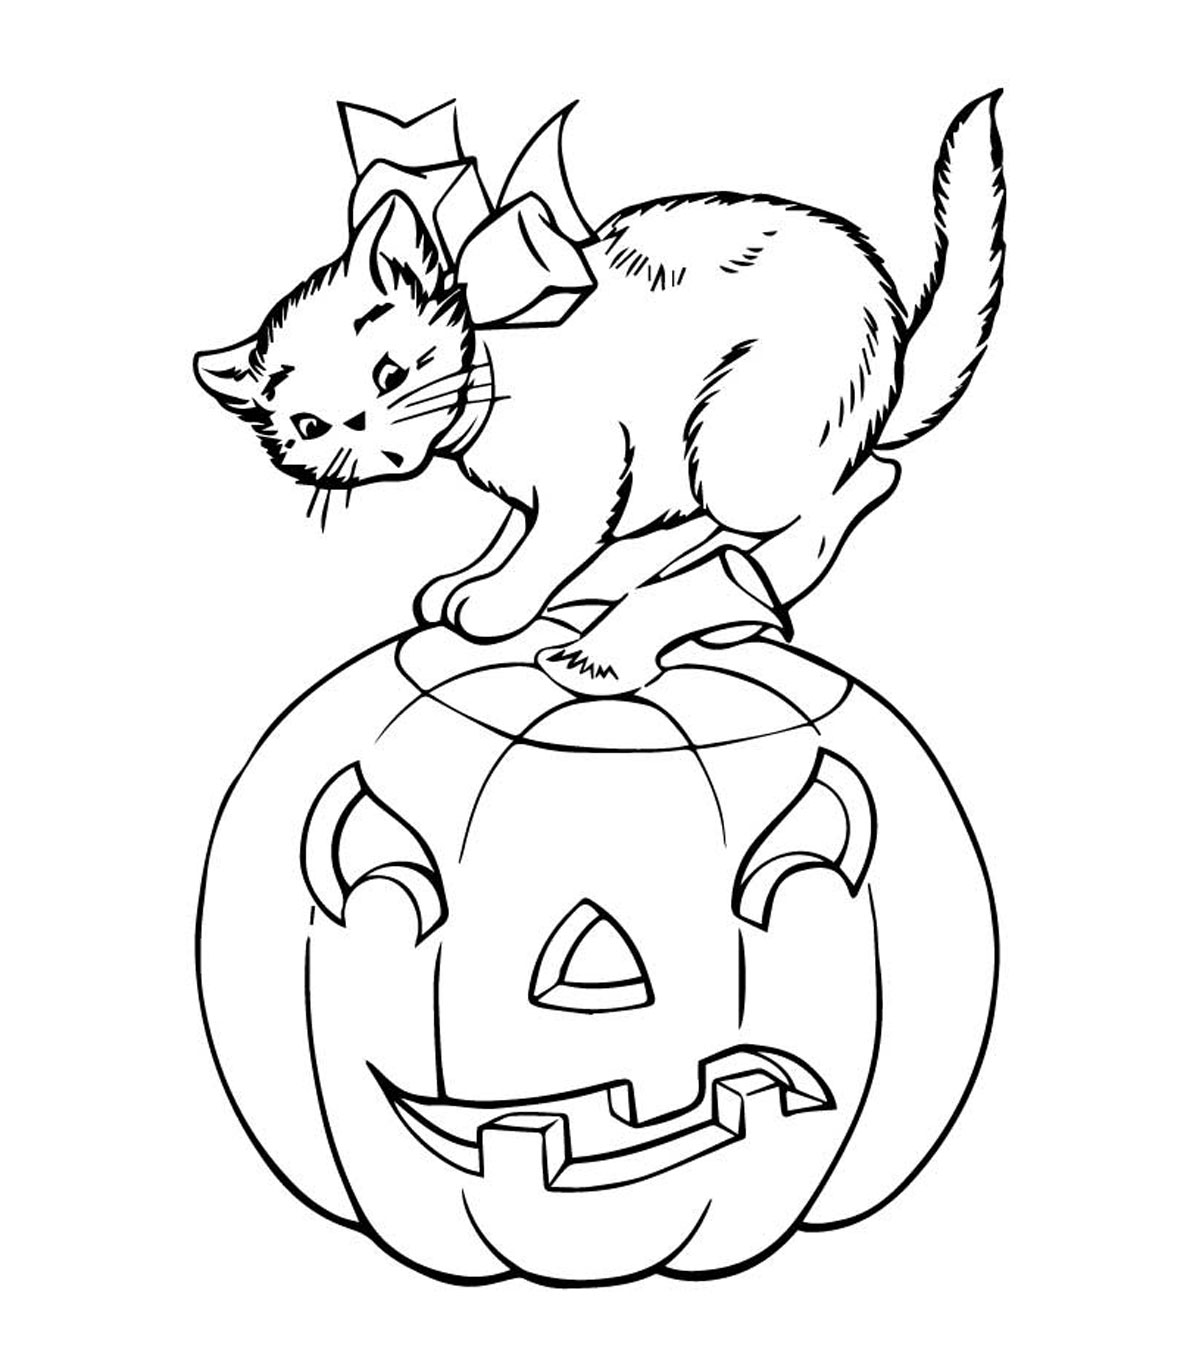 Top 25 Pumpkin Patch Coloring Pages Your Toddler Will Love To Do